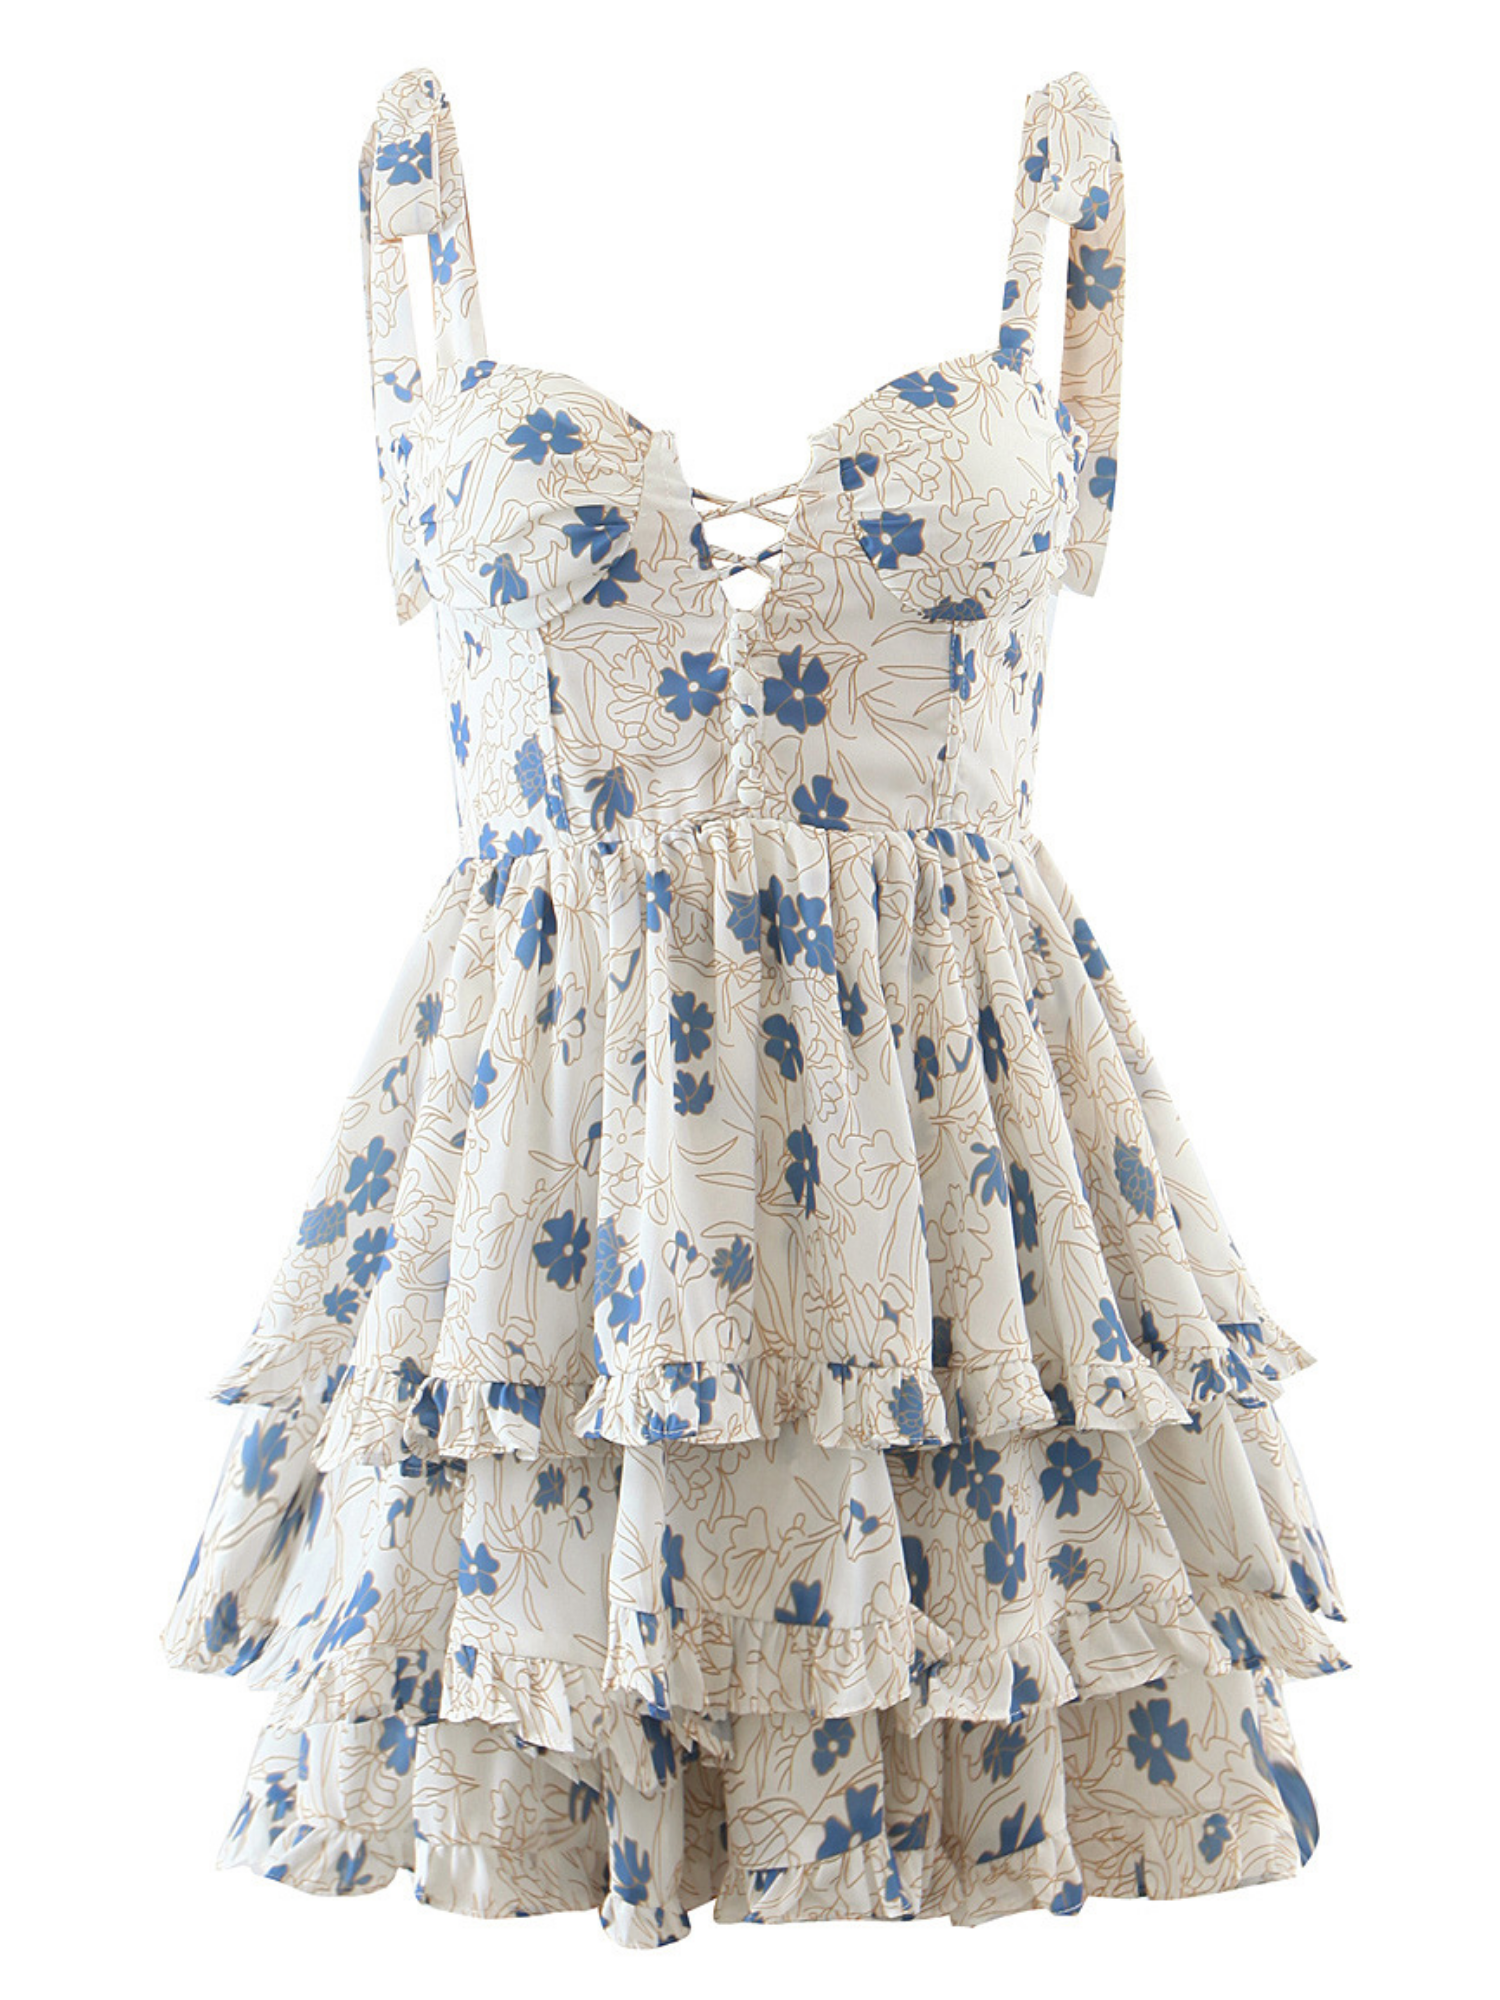 – Lilly\' Floral Dress Lace-Up Mini Macaroon Printed Goodnight